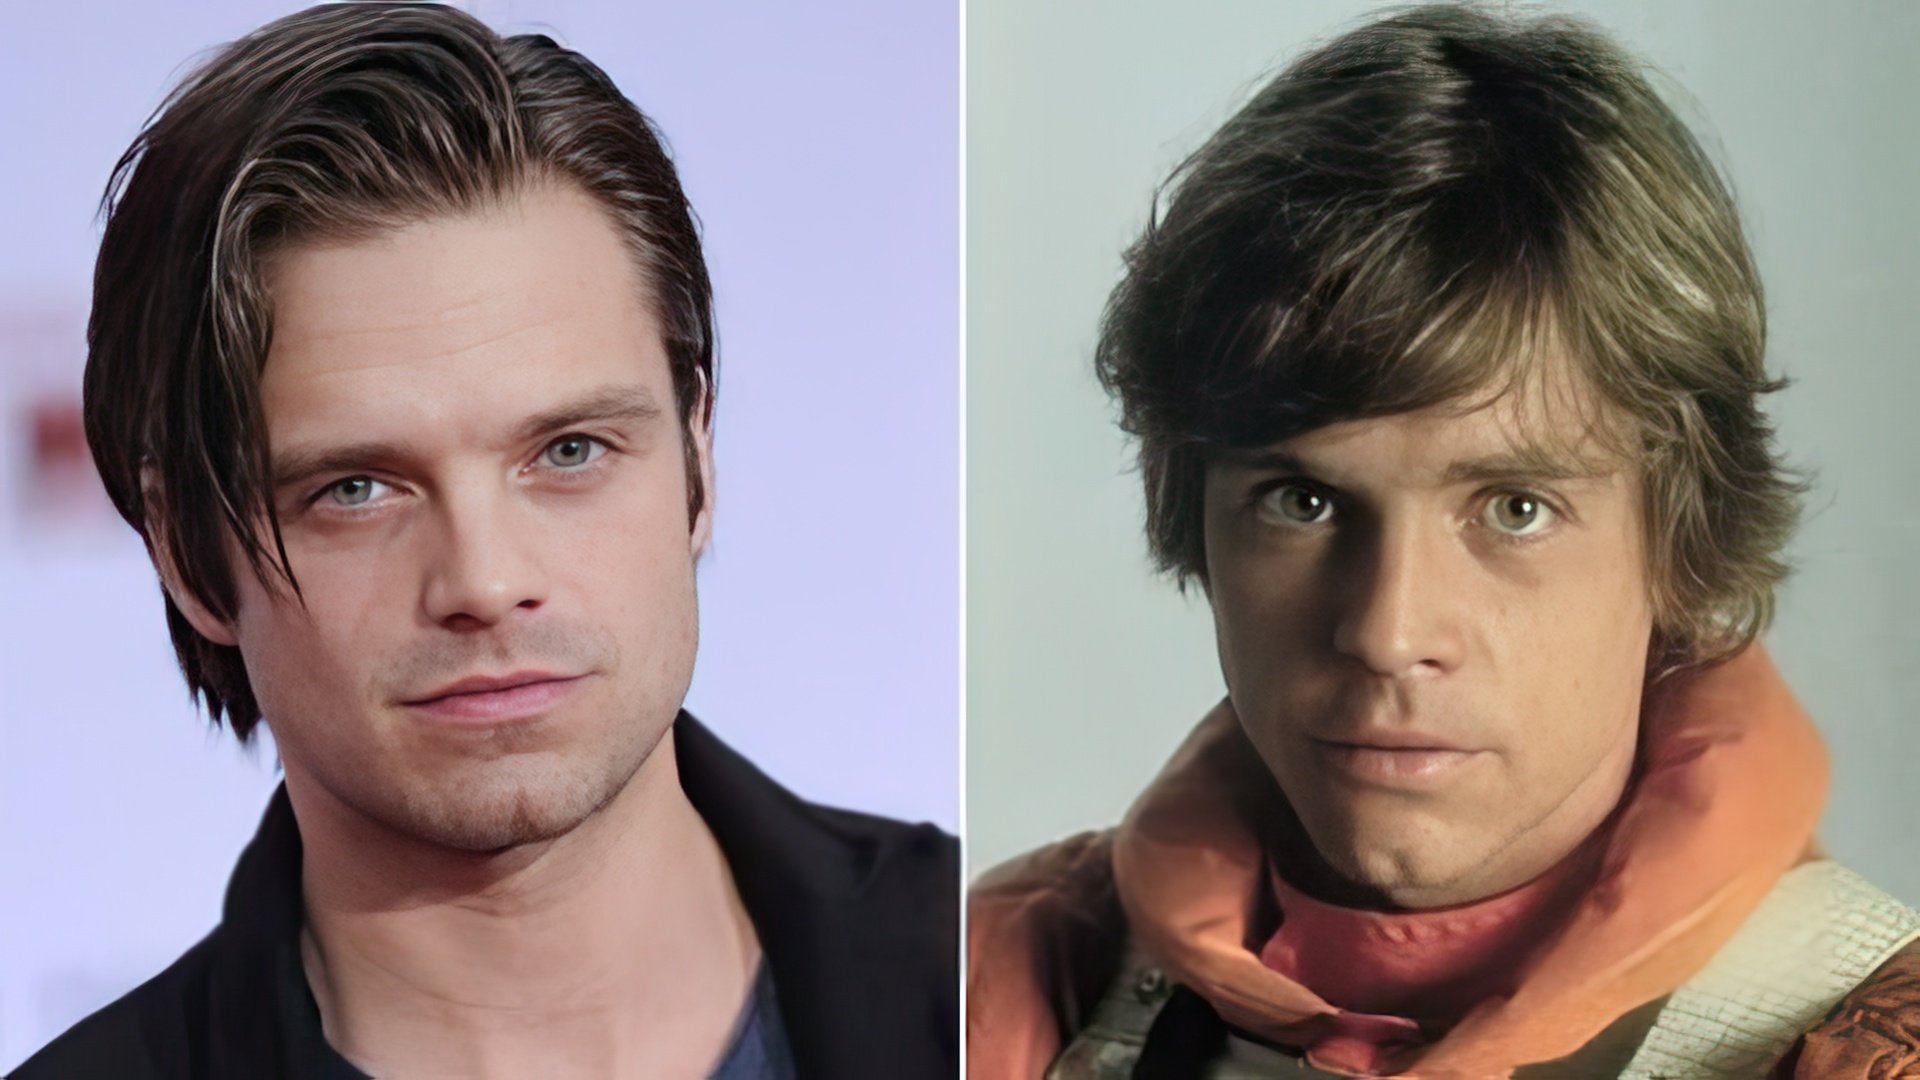 Sebastian Stan and Mark Hamill in their youth – many see the resemblance